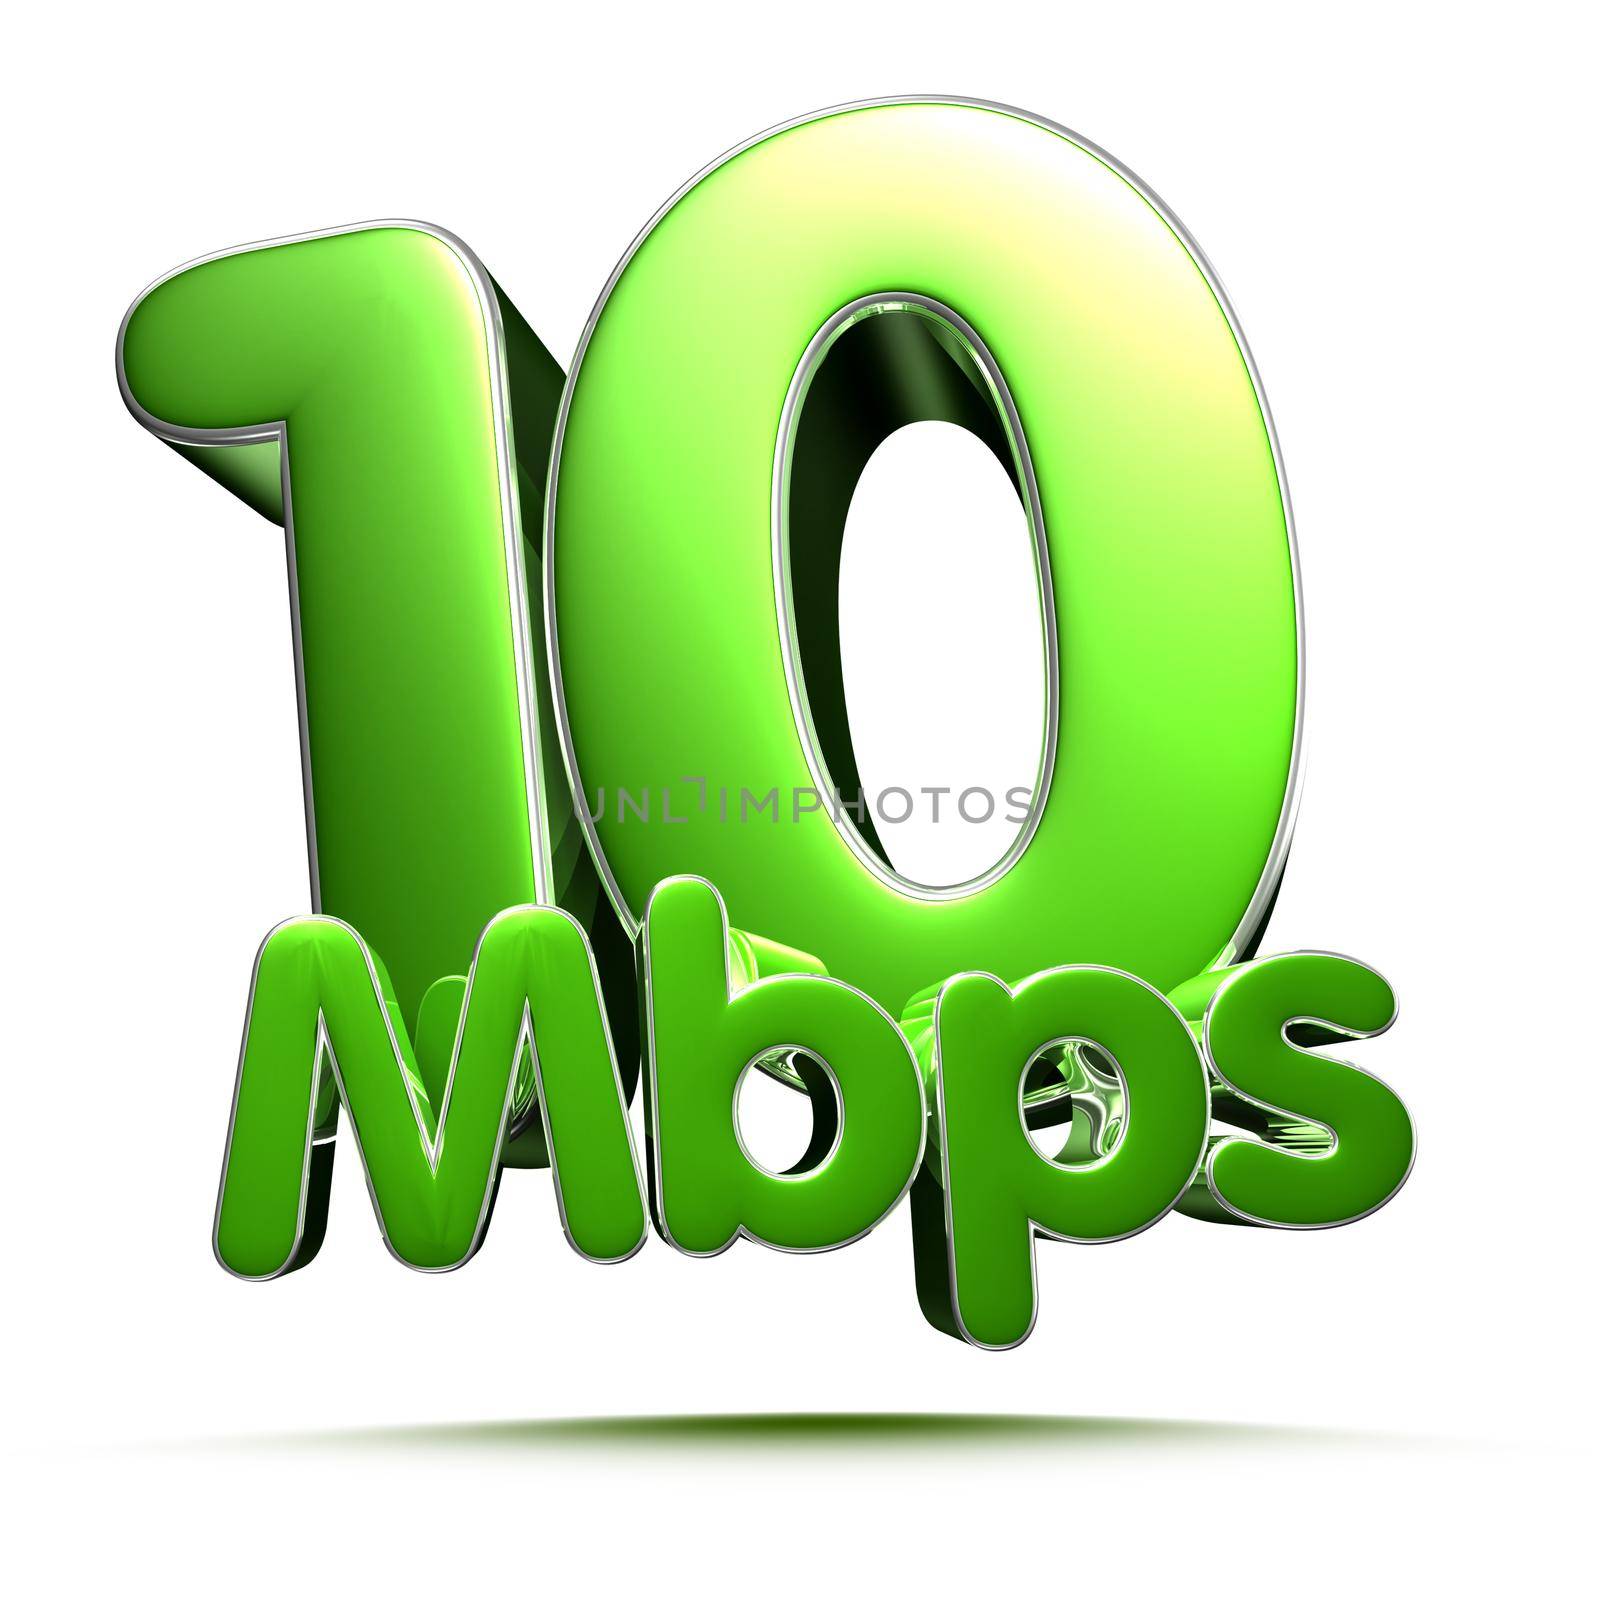 10 Mbps green 3D illustration on white background with clipping path.